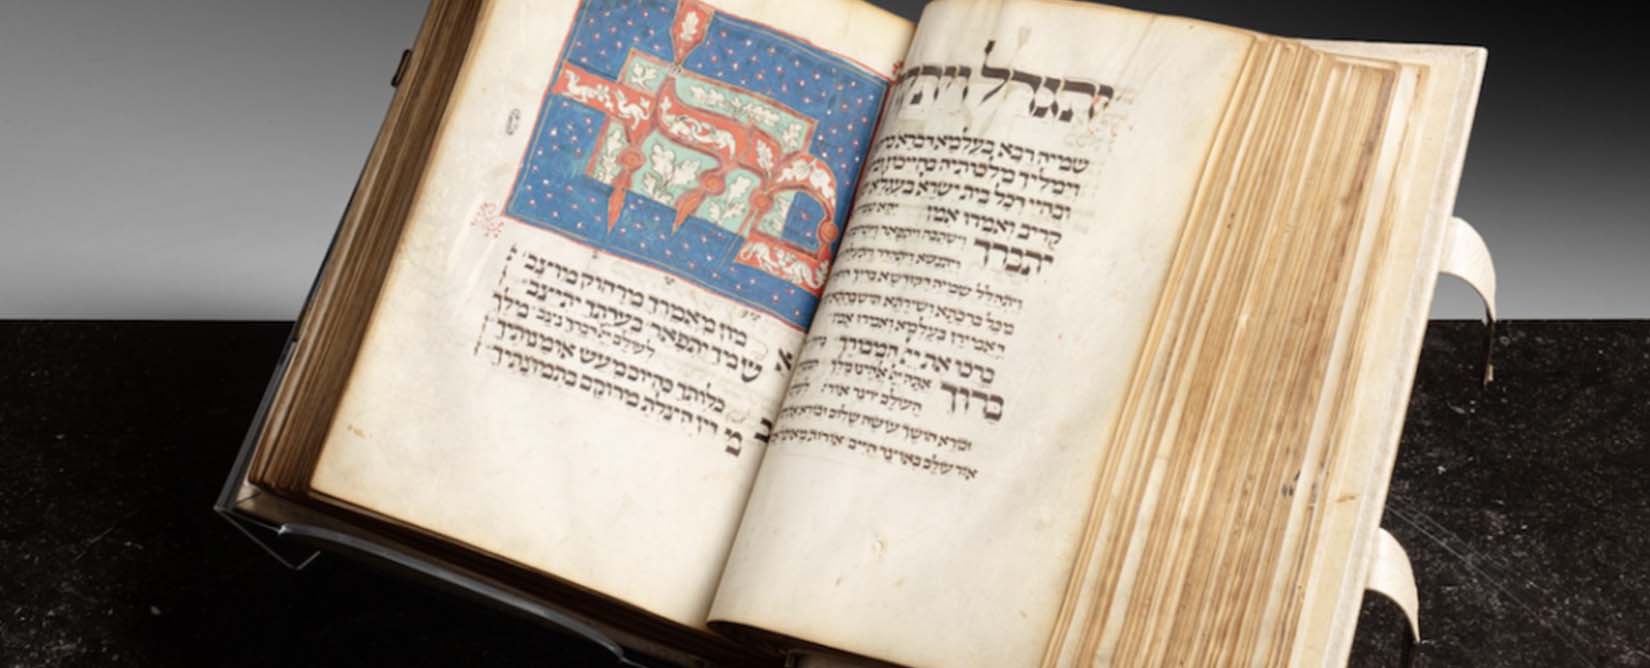 Prayer book goes for 8.3 million dollars at auction… 